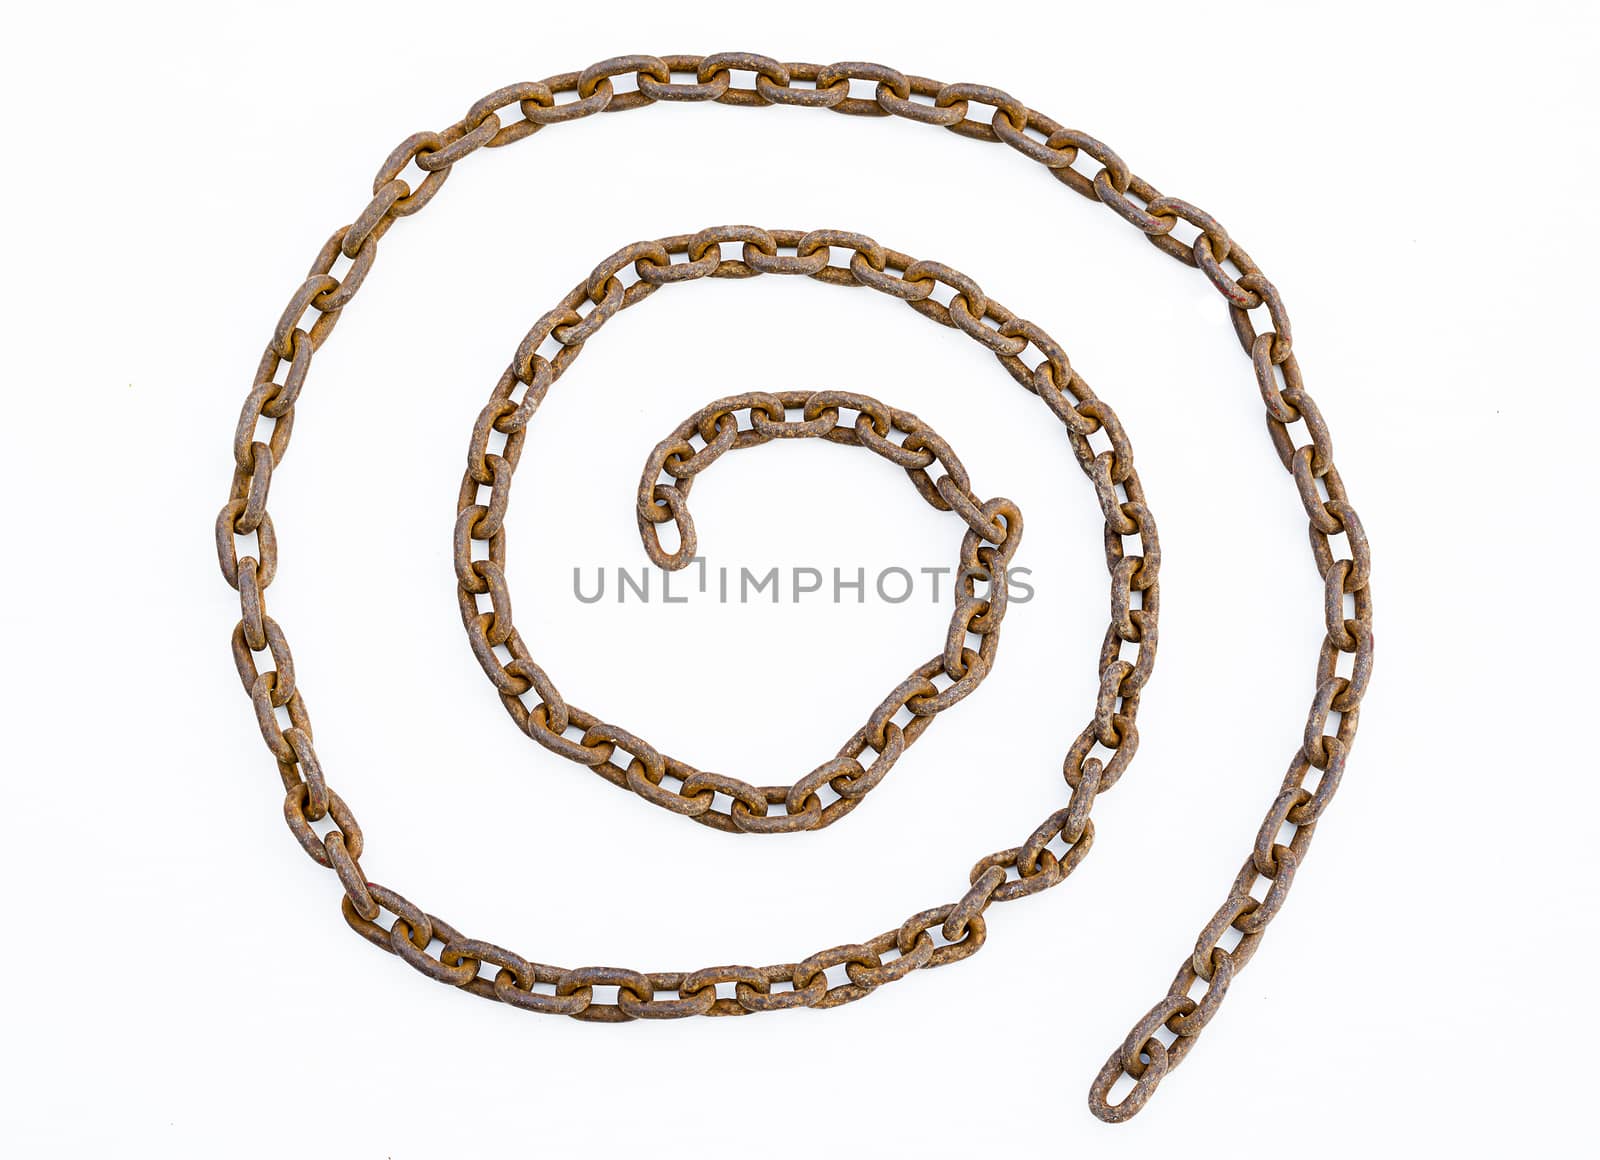 Rusty chains isolated on white background, old chains